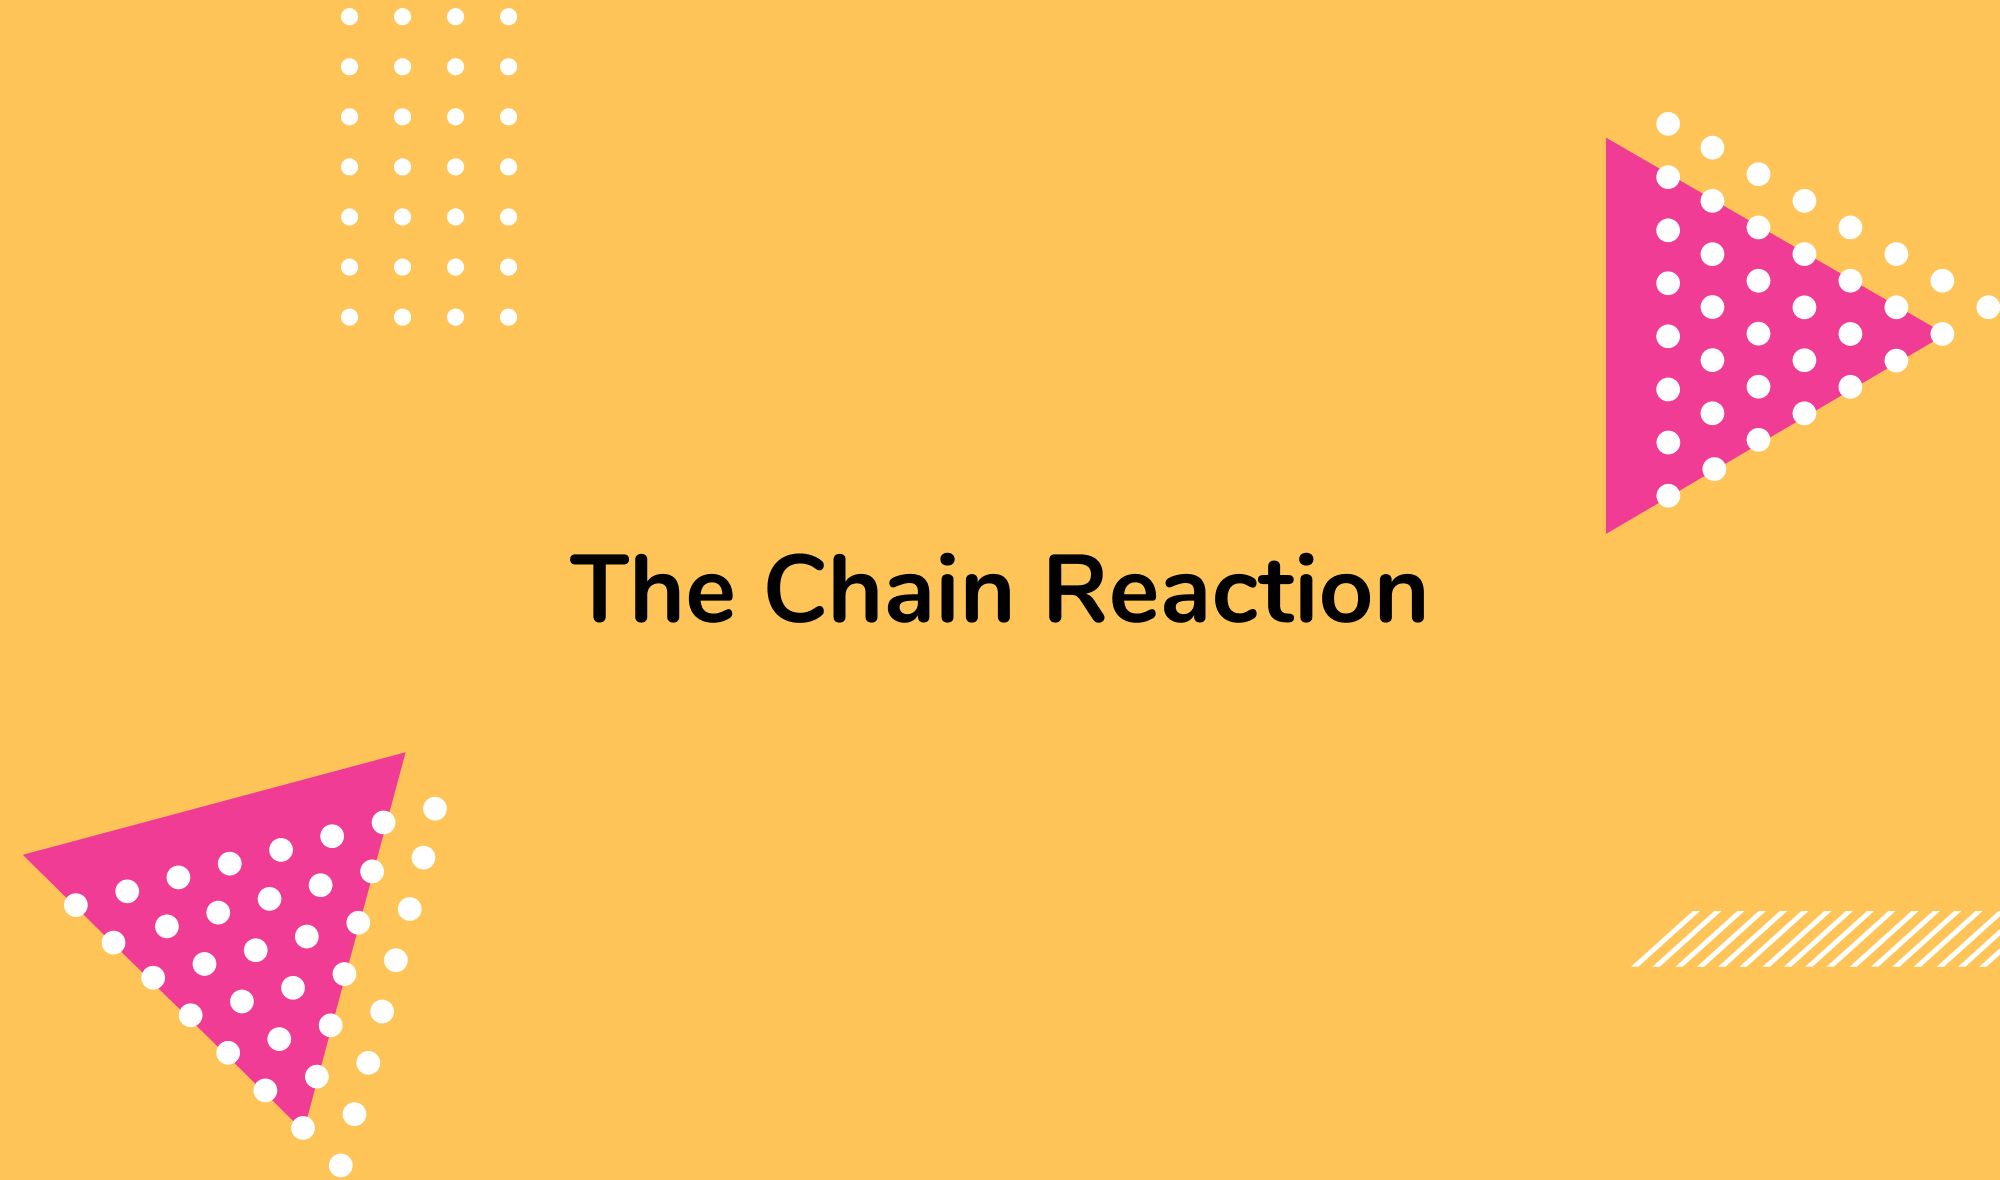 The Chain Reaction: How Poor Performance Leads to Poorly Performed Tasks